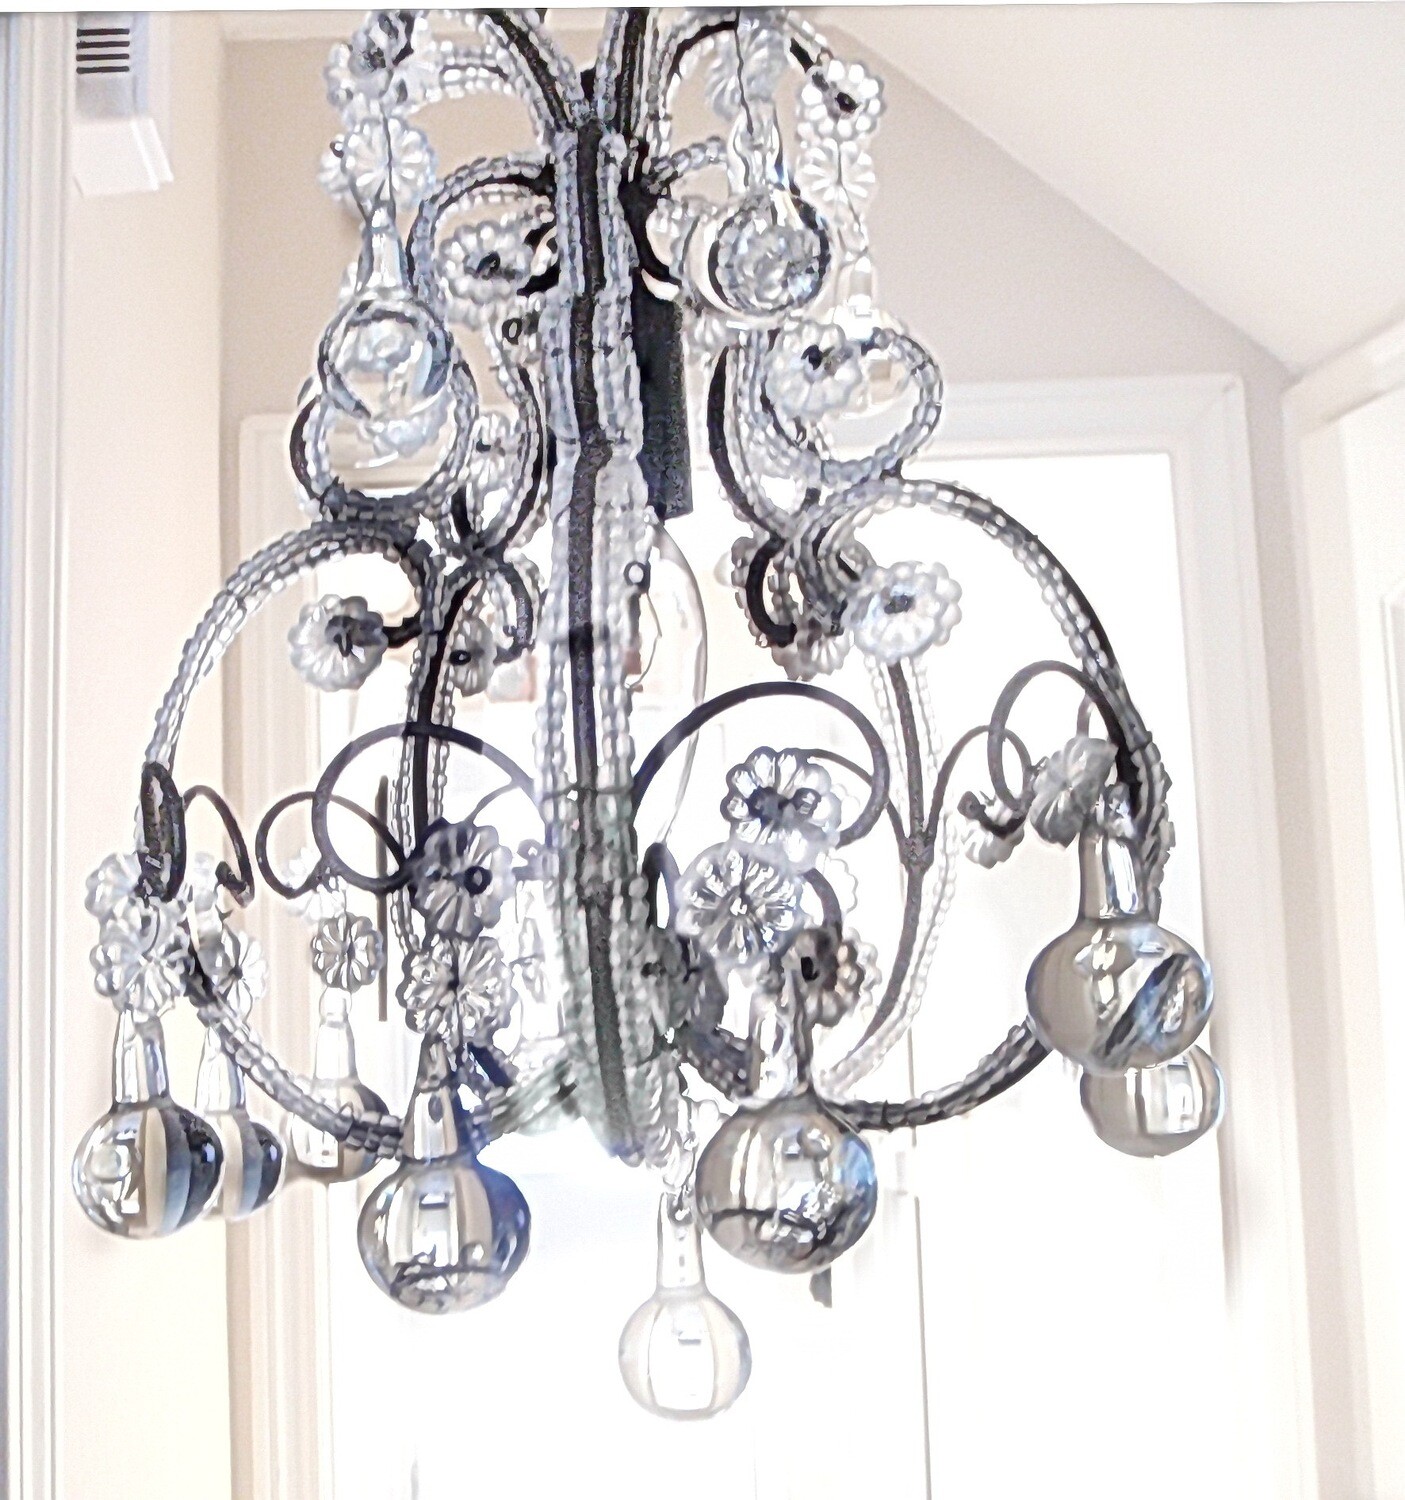 Antique beaded cage chandelier with swags, fleurets and Murano drops